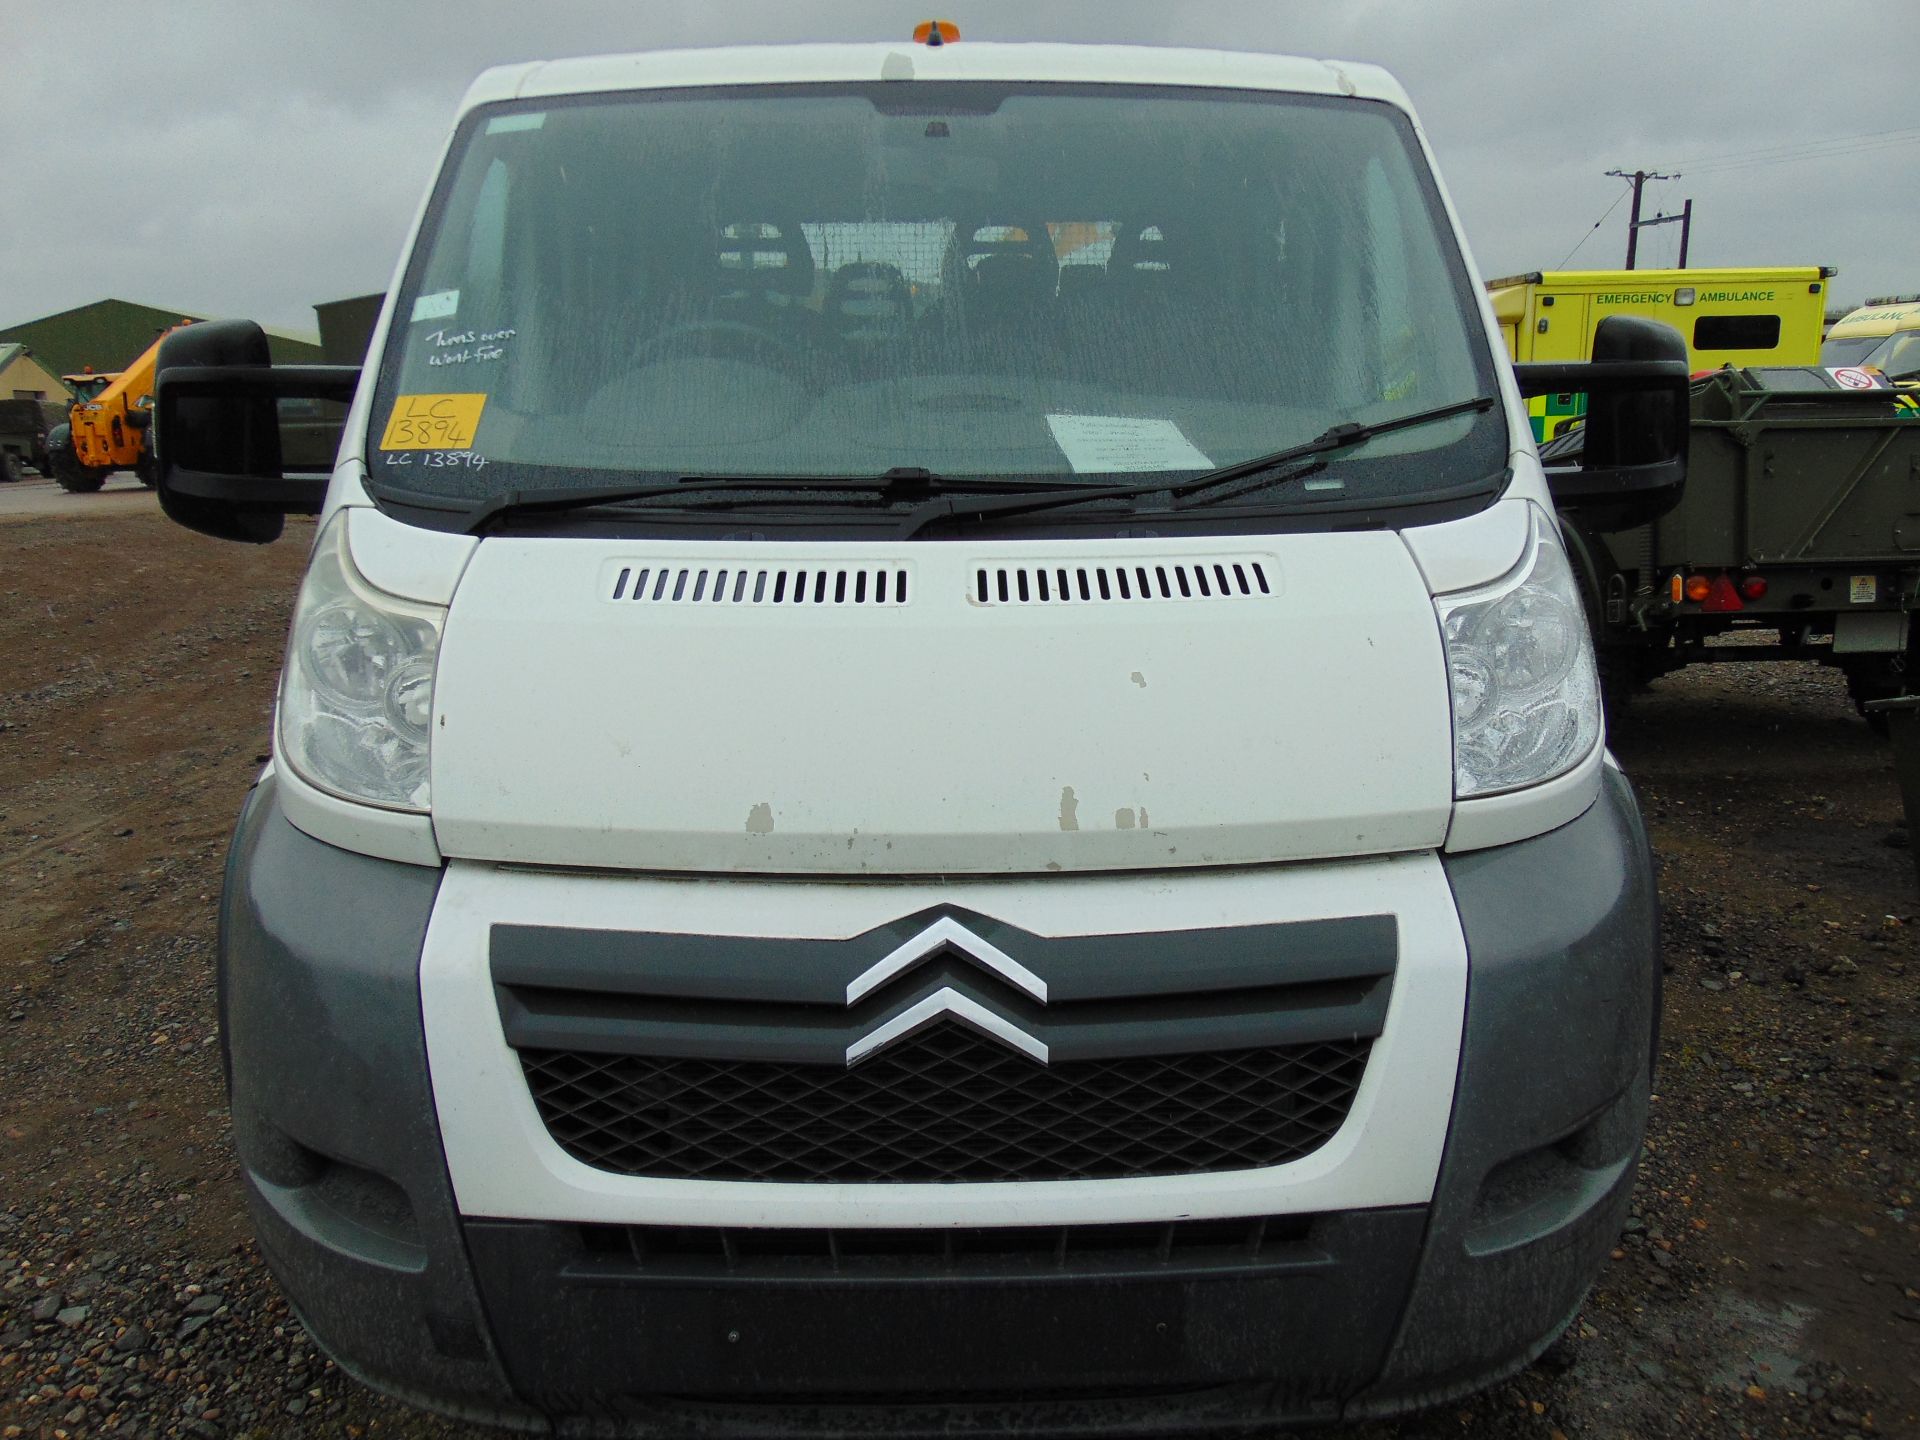 Citroen Relay 7 Seater Double Cab Dropside Pickup - Image 2 of 15